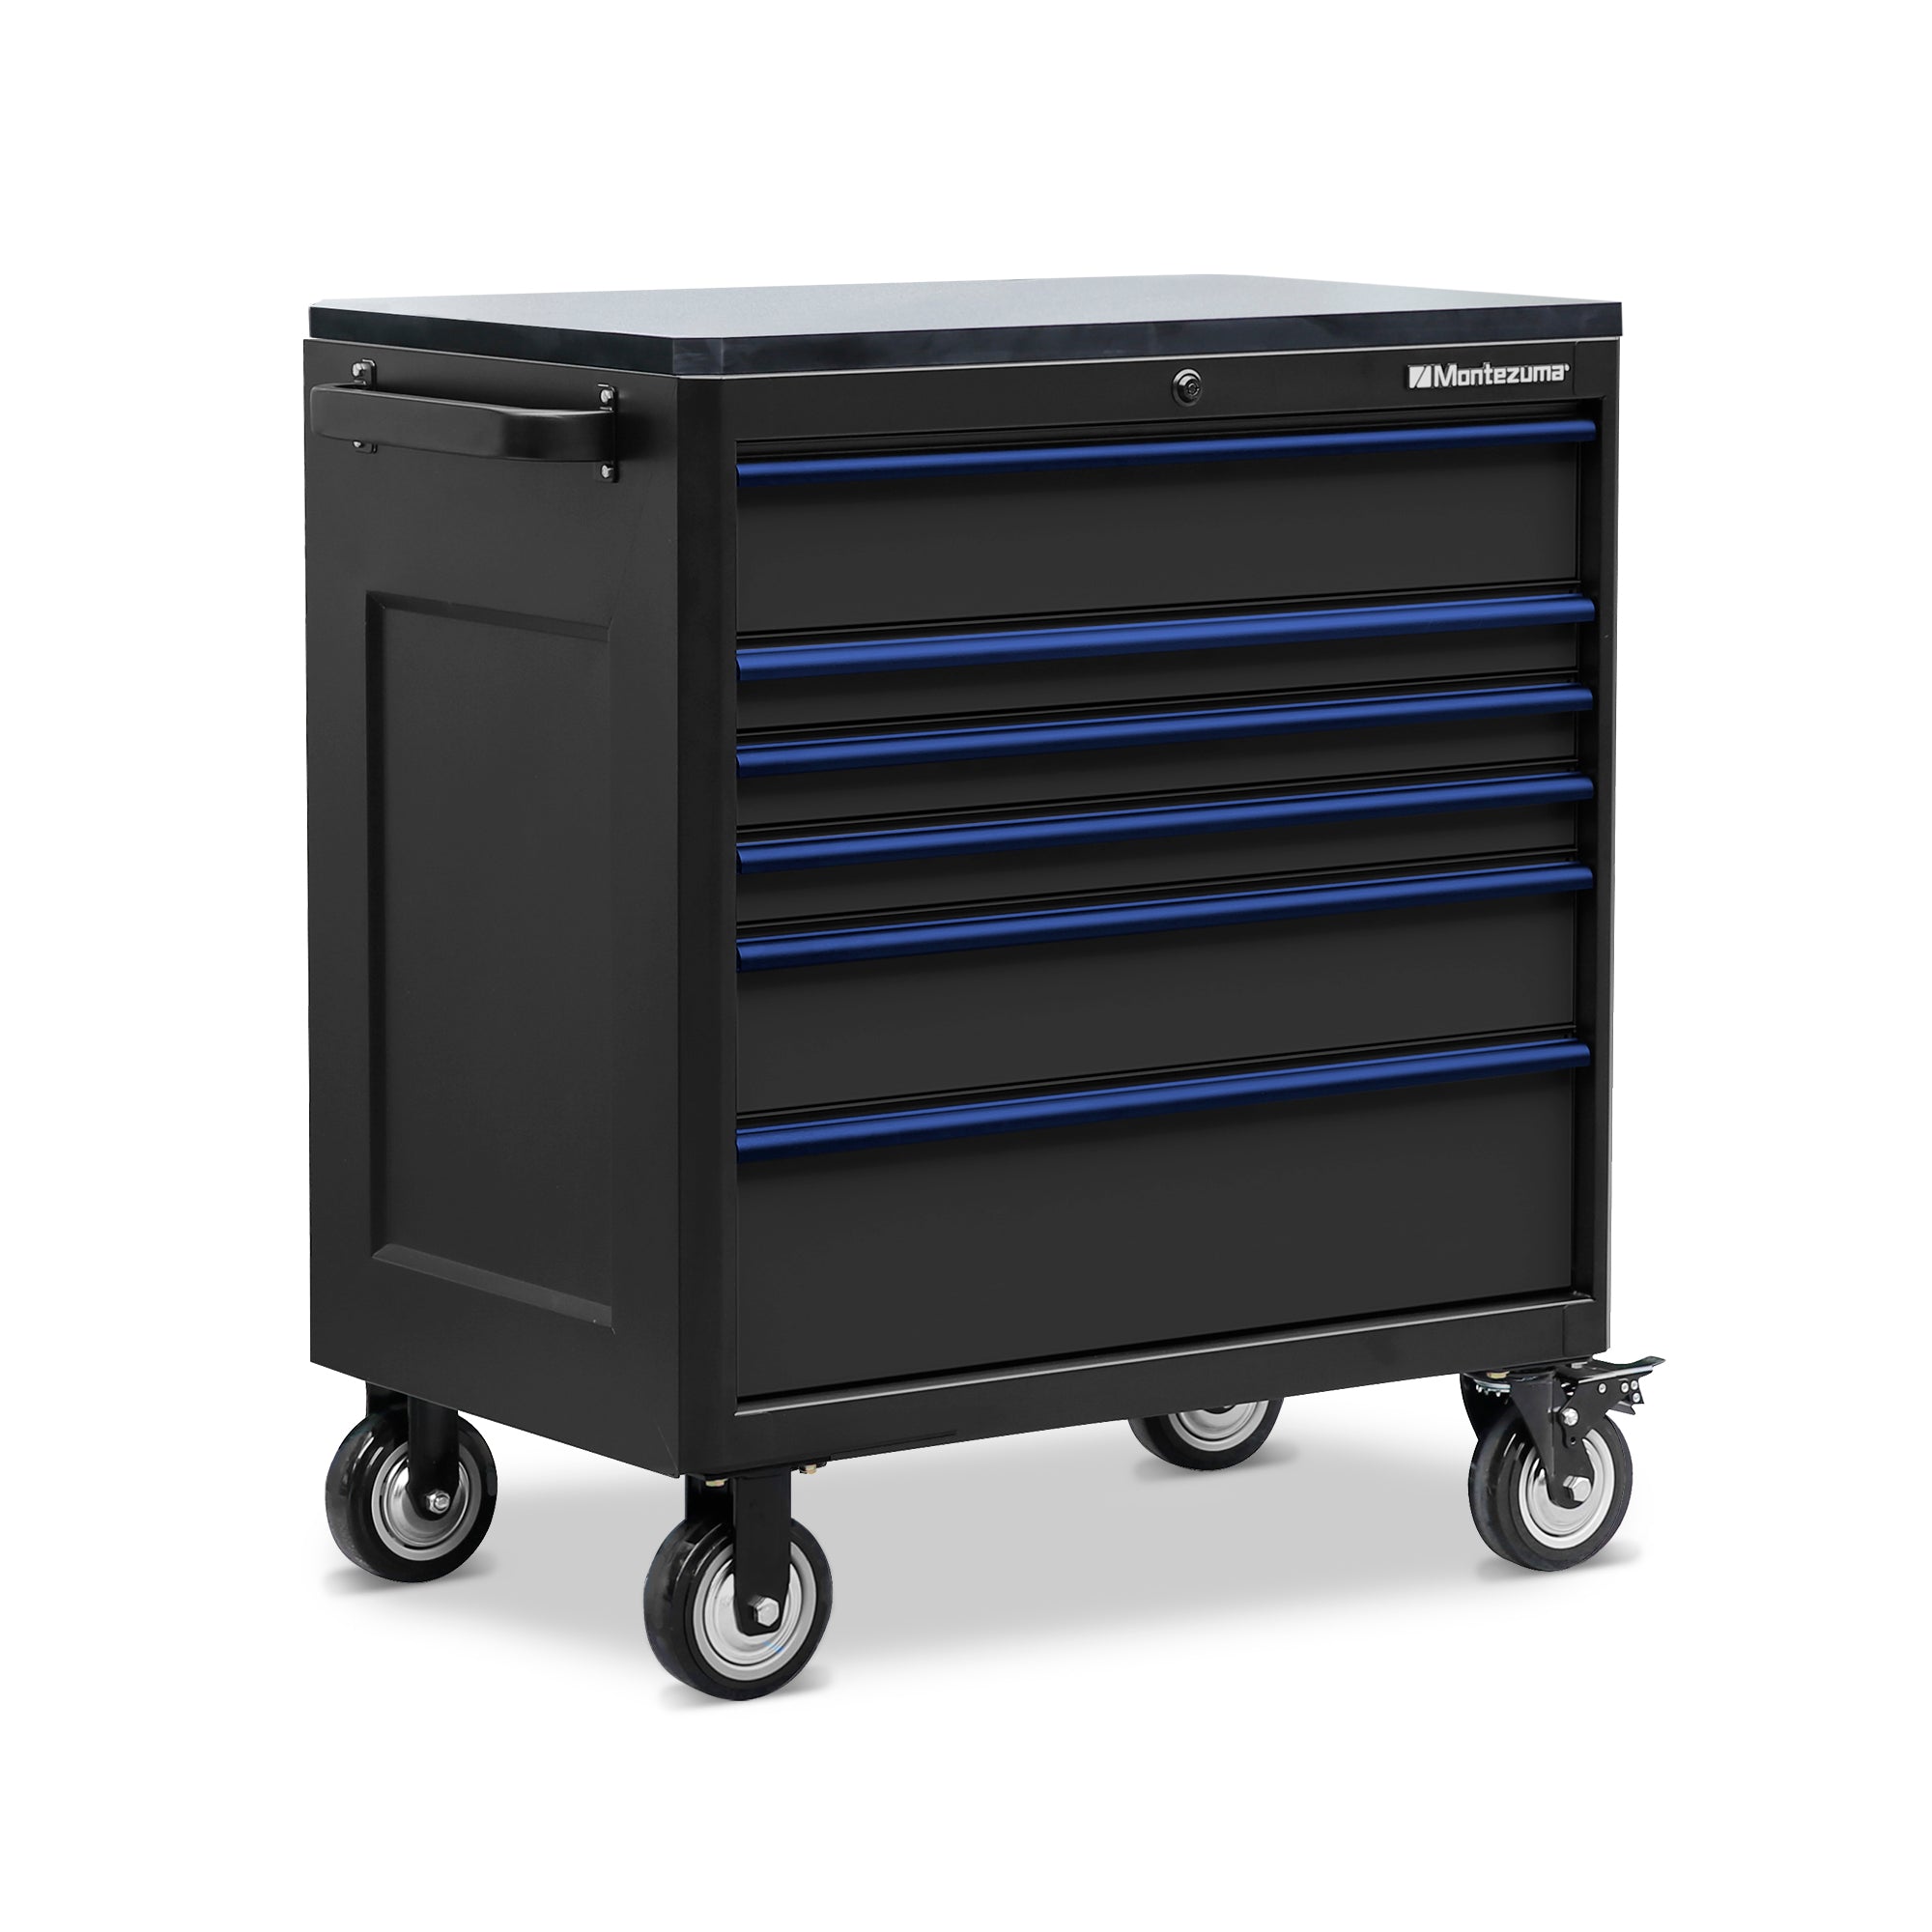 Channellock 26 In. 7-Drawer Black and Blue Tool Chest - Bliffert